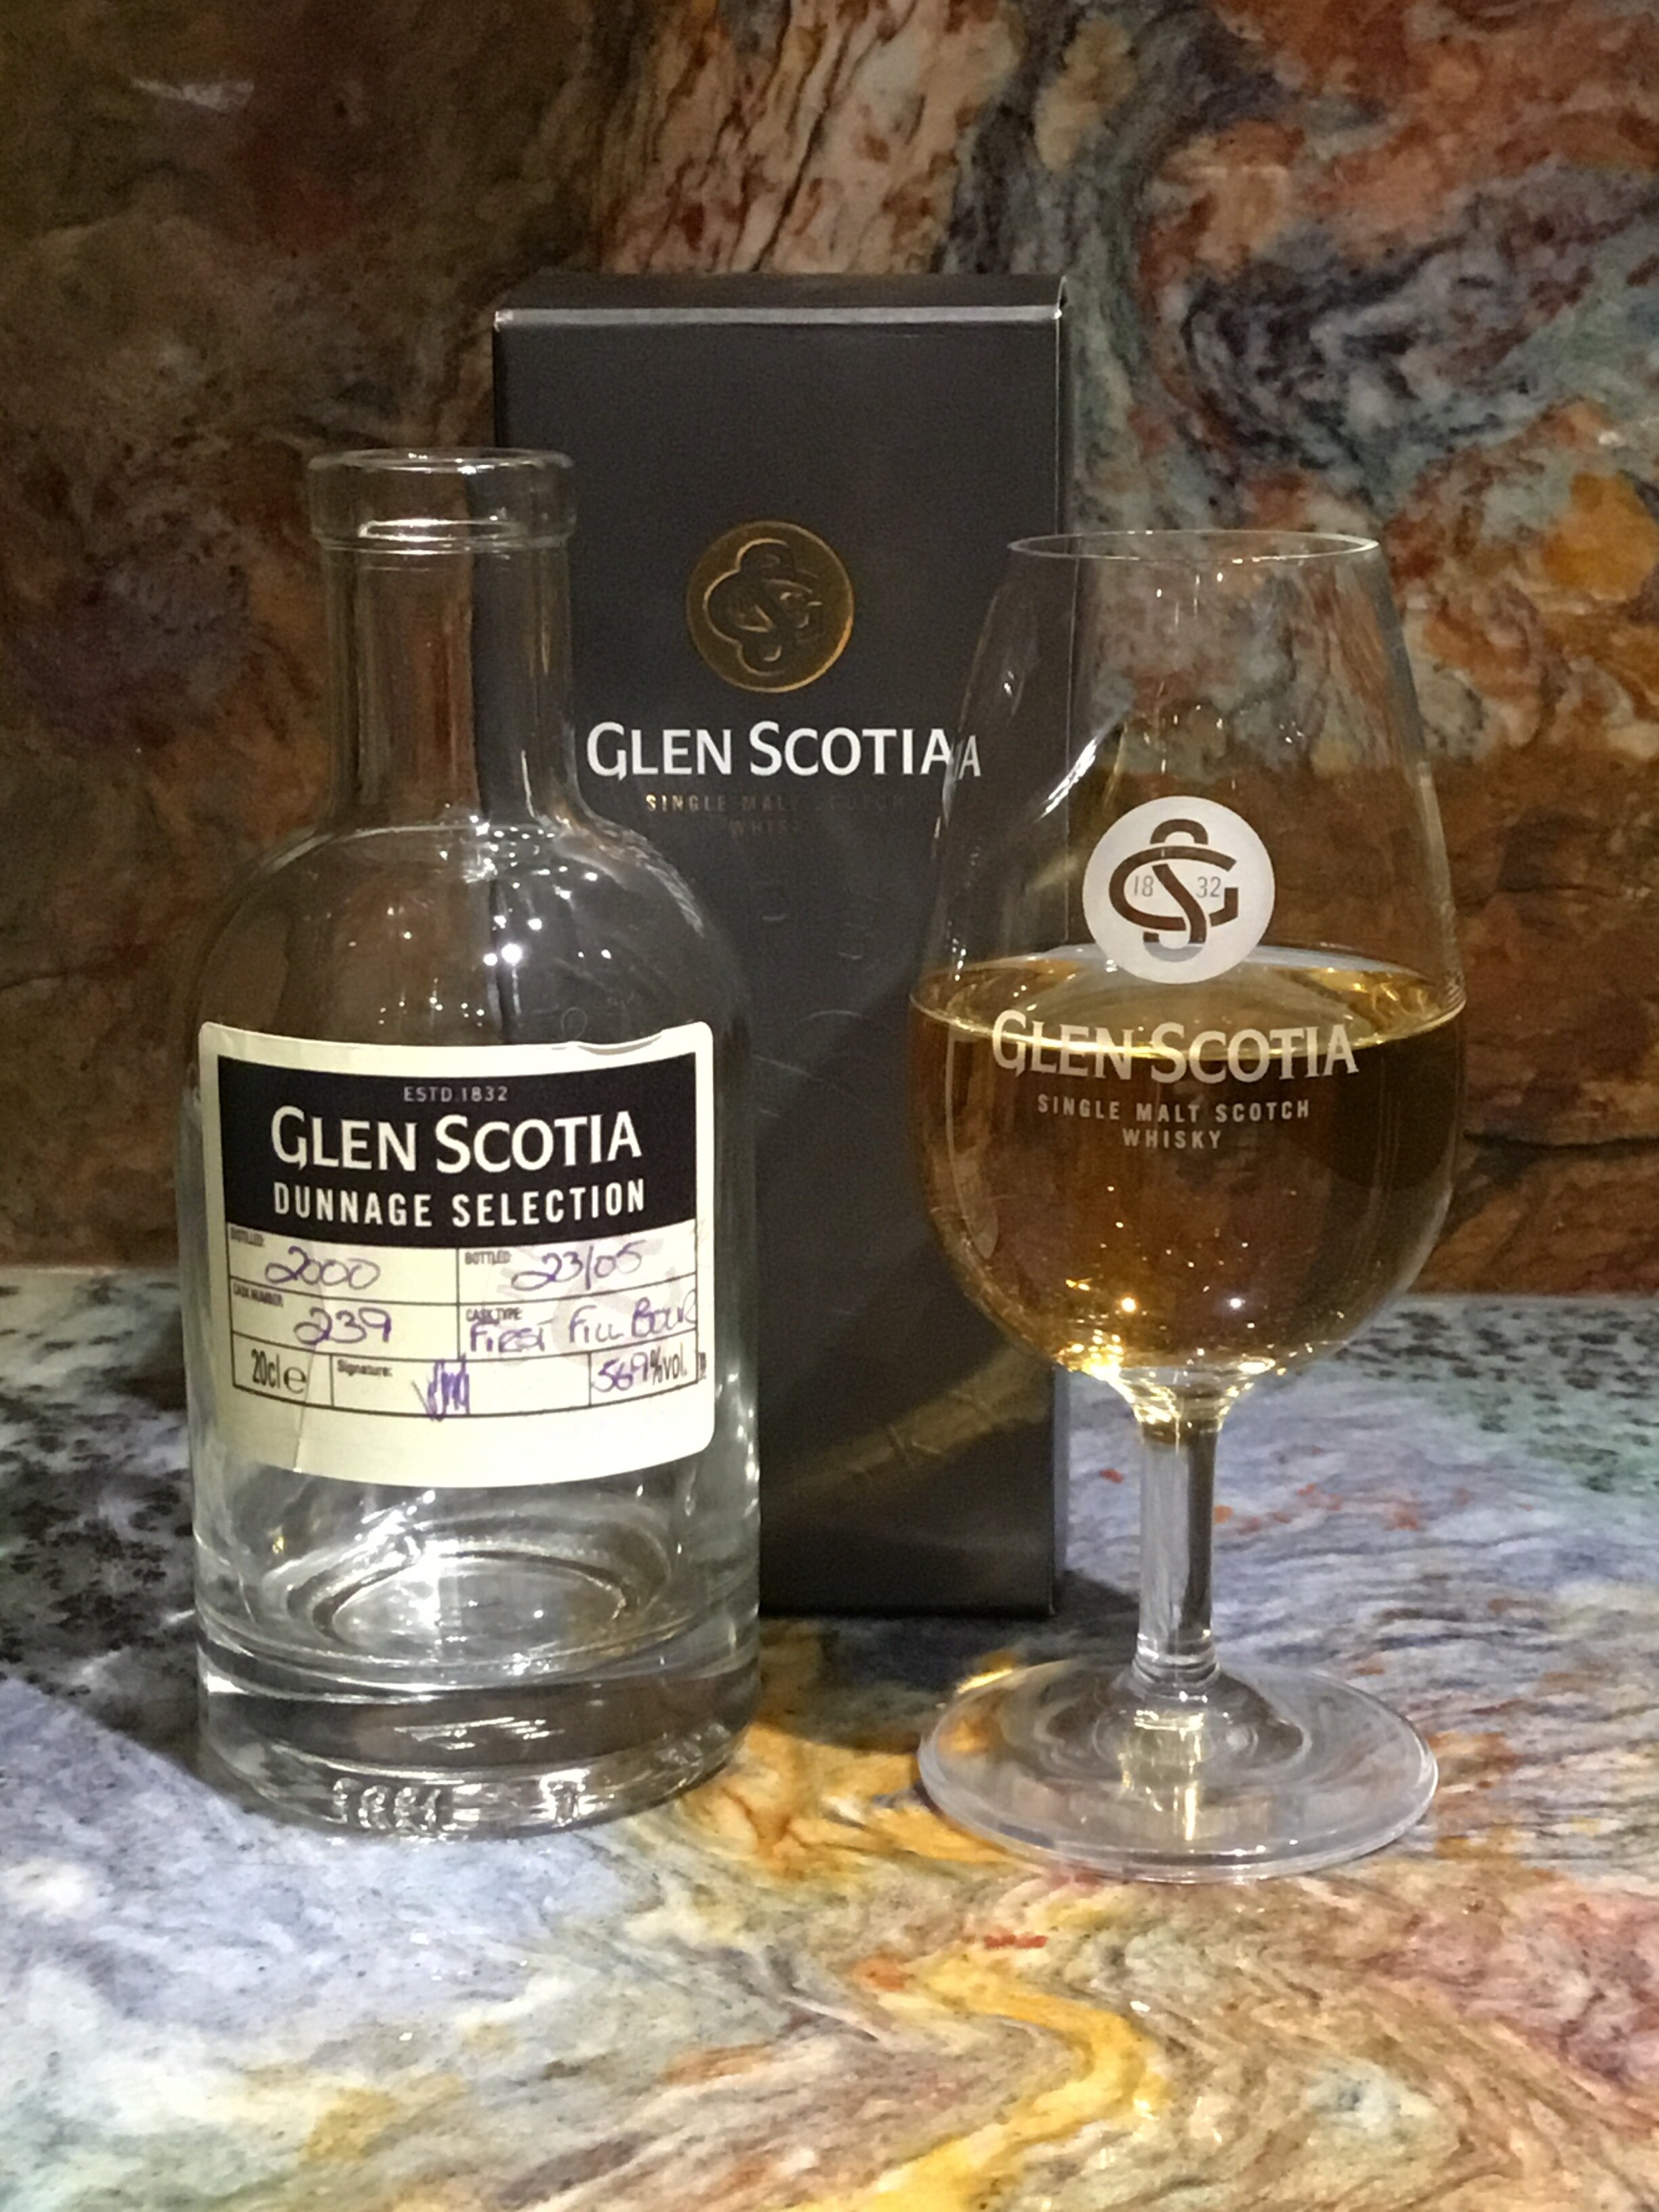 Out and About: Glen Scotia Dunnage Tasting